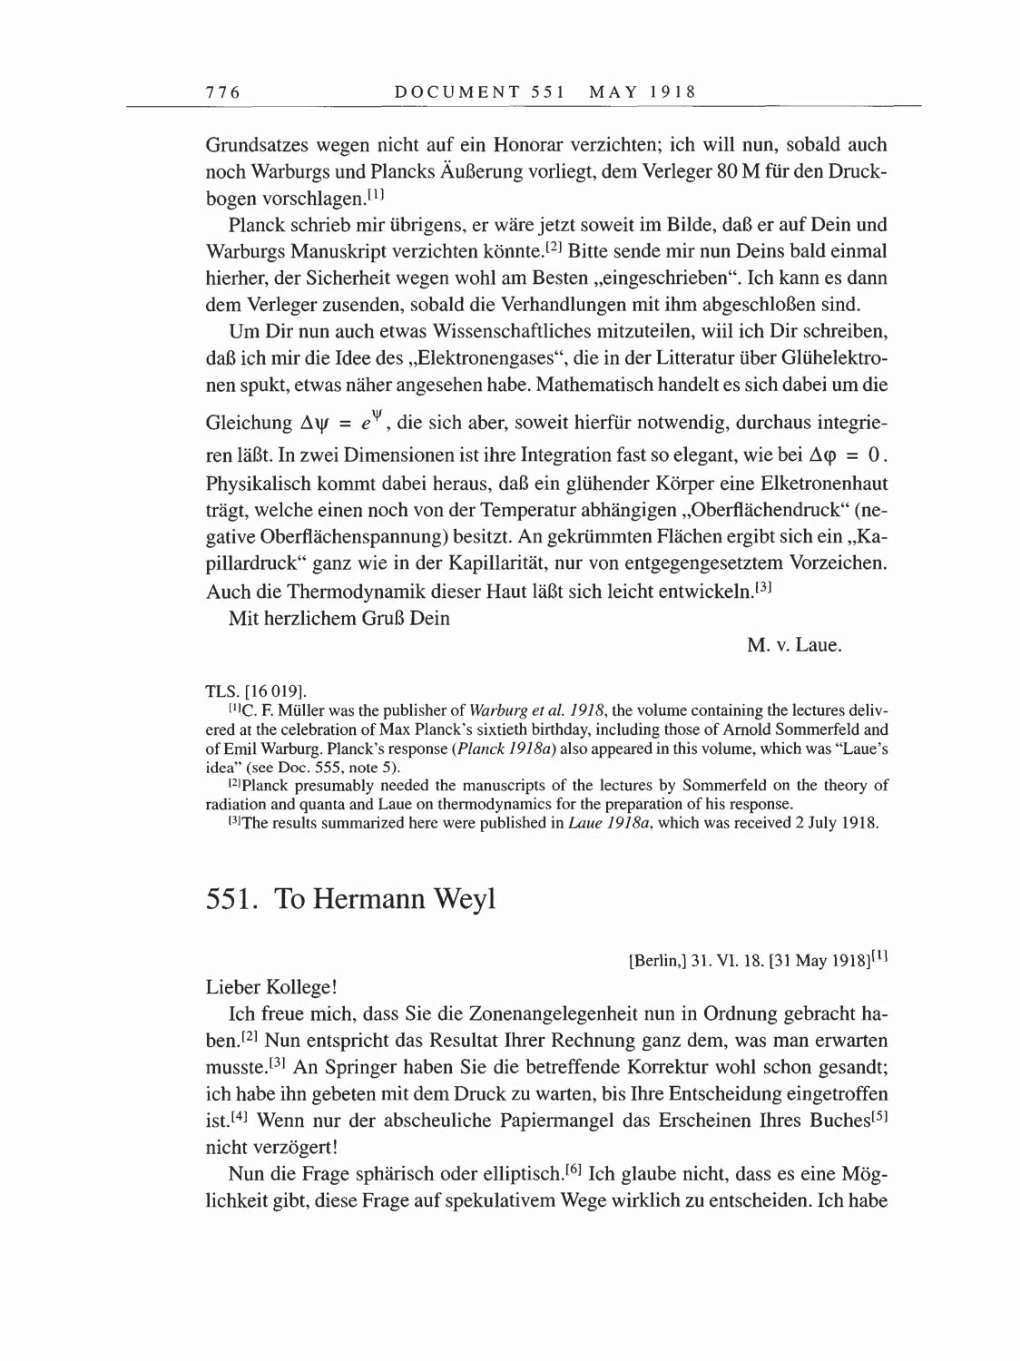 Volume 8, Part B: The Berlin Years: Correspondence 1918 page 776